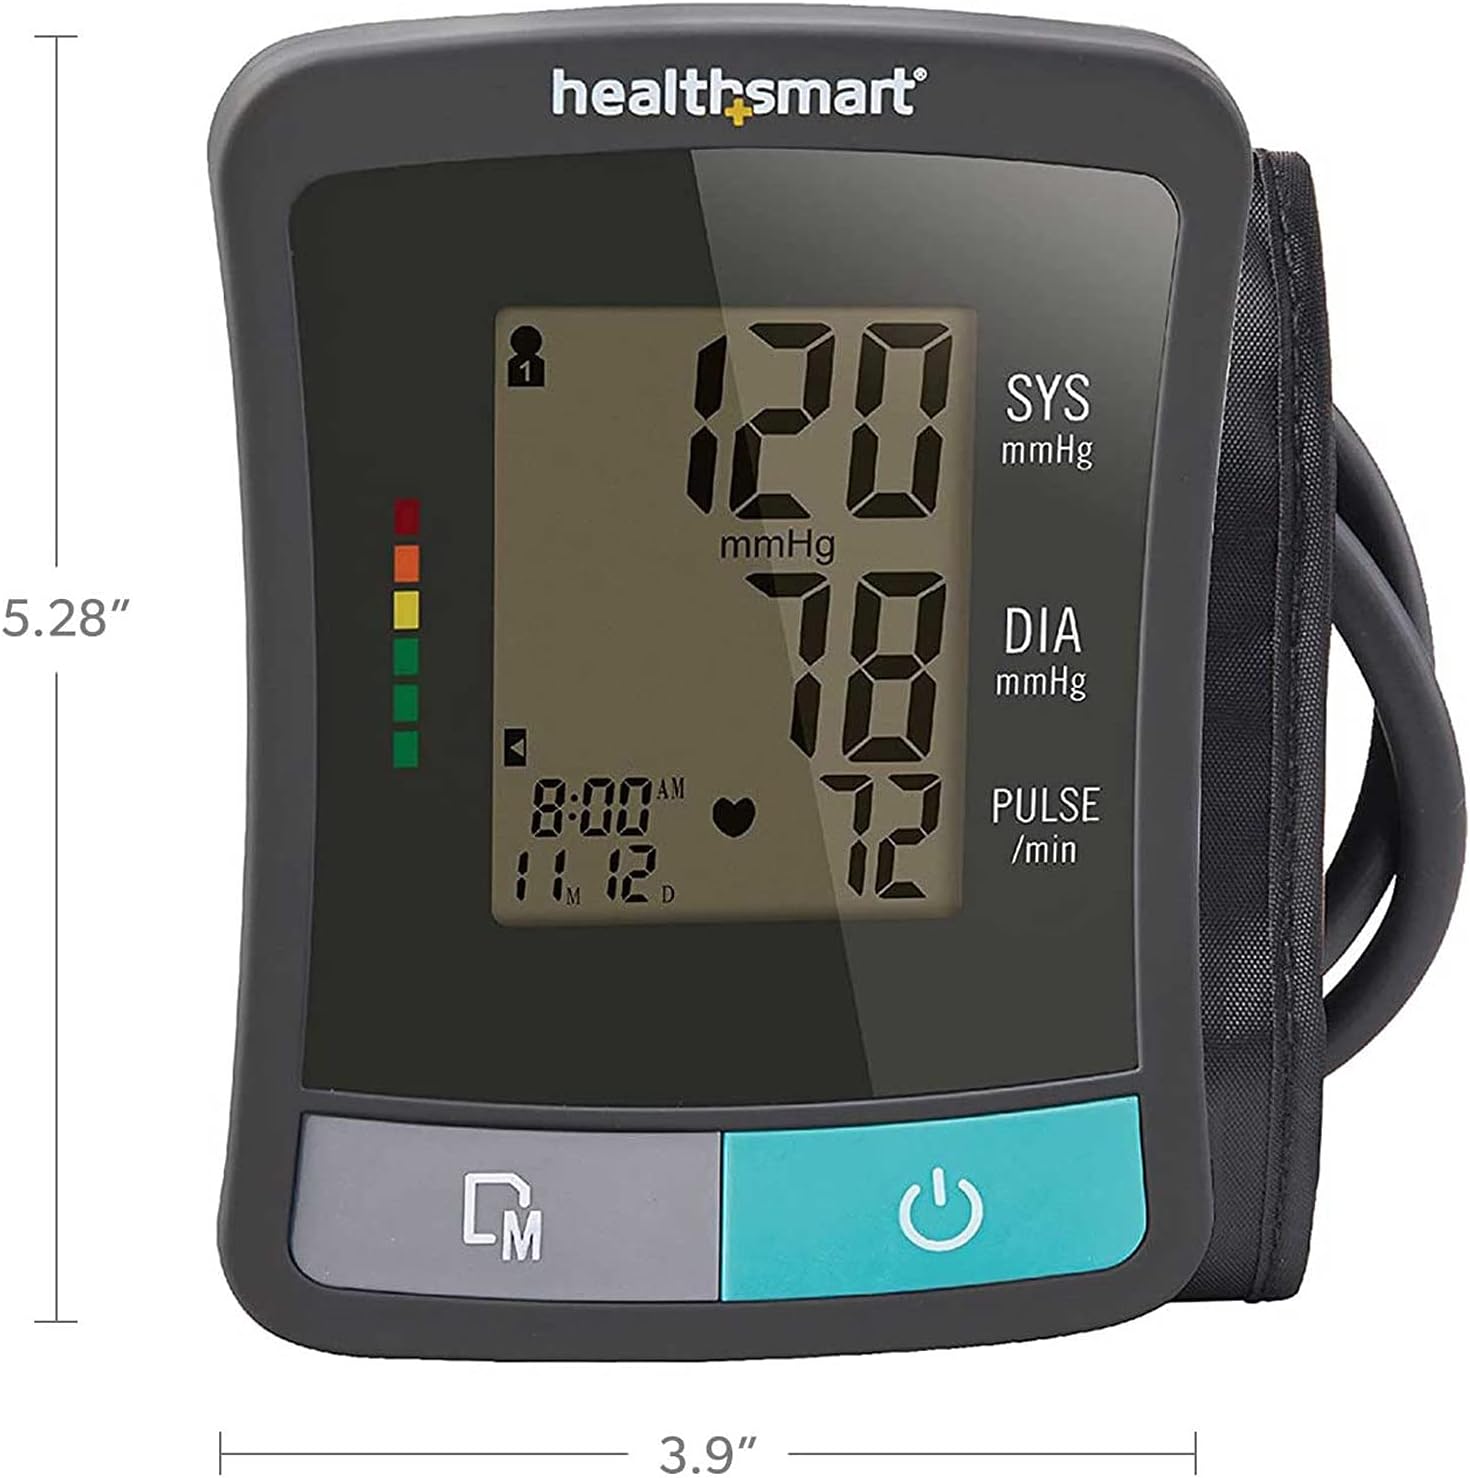 HealthSmart Digital Premium Blood Pressure Monitor with Automatic Upper Arm Cuff that Displays Blood Pressure, Pulse Rate and Irregular Heartbeat, Stores up to 120 Readings for 2 Users